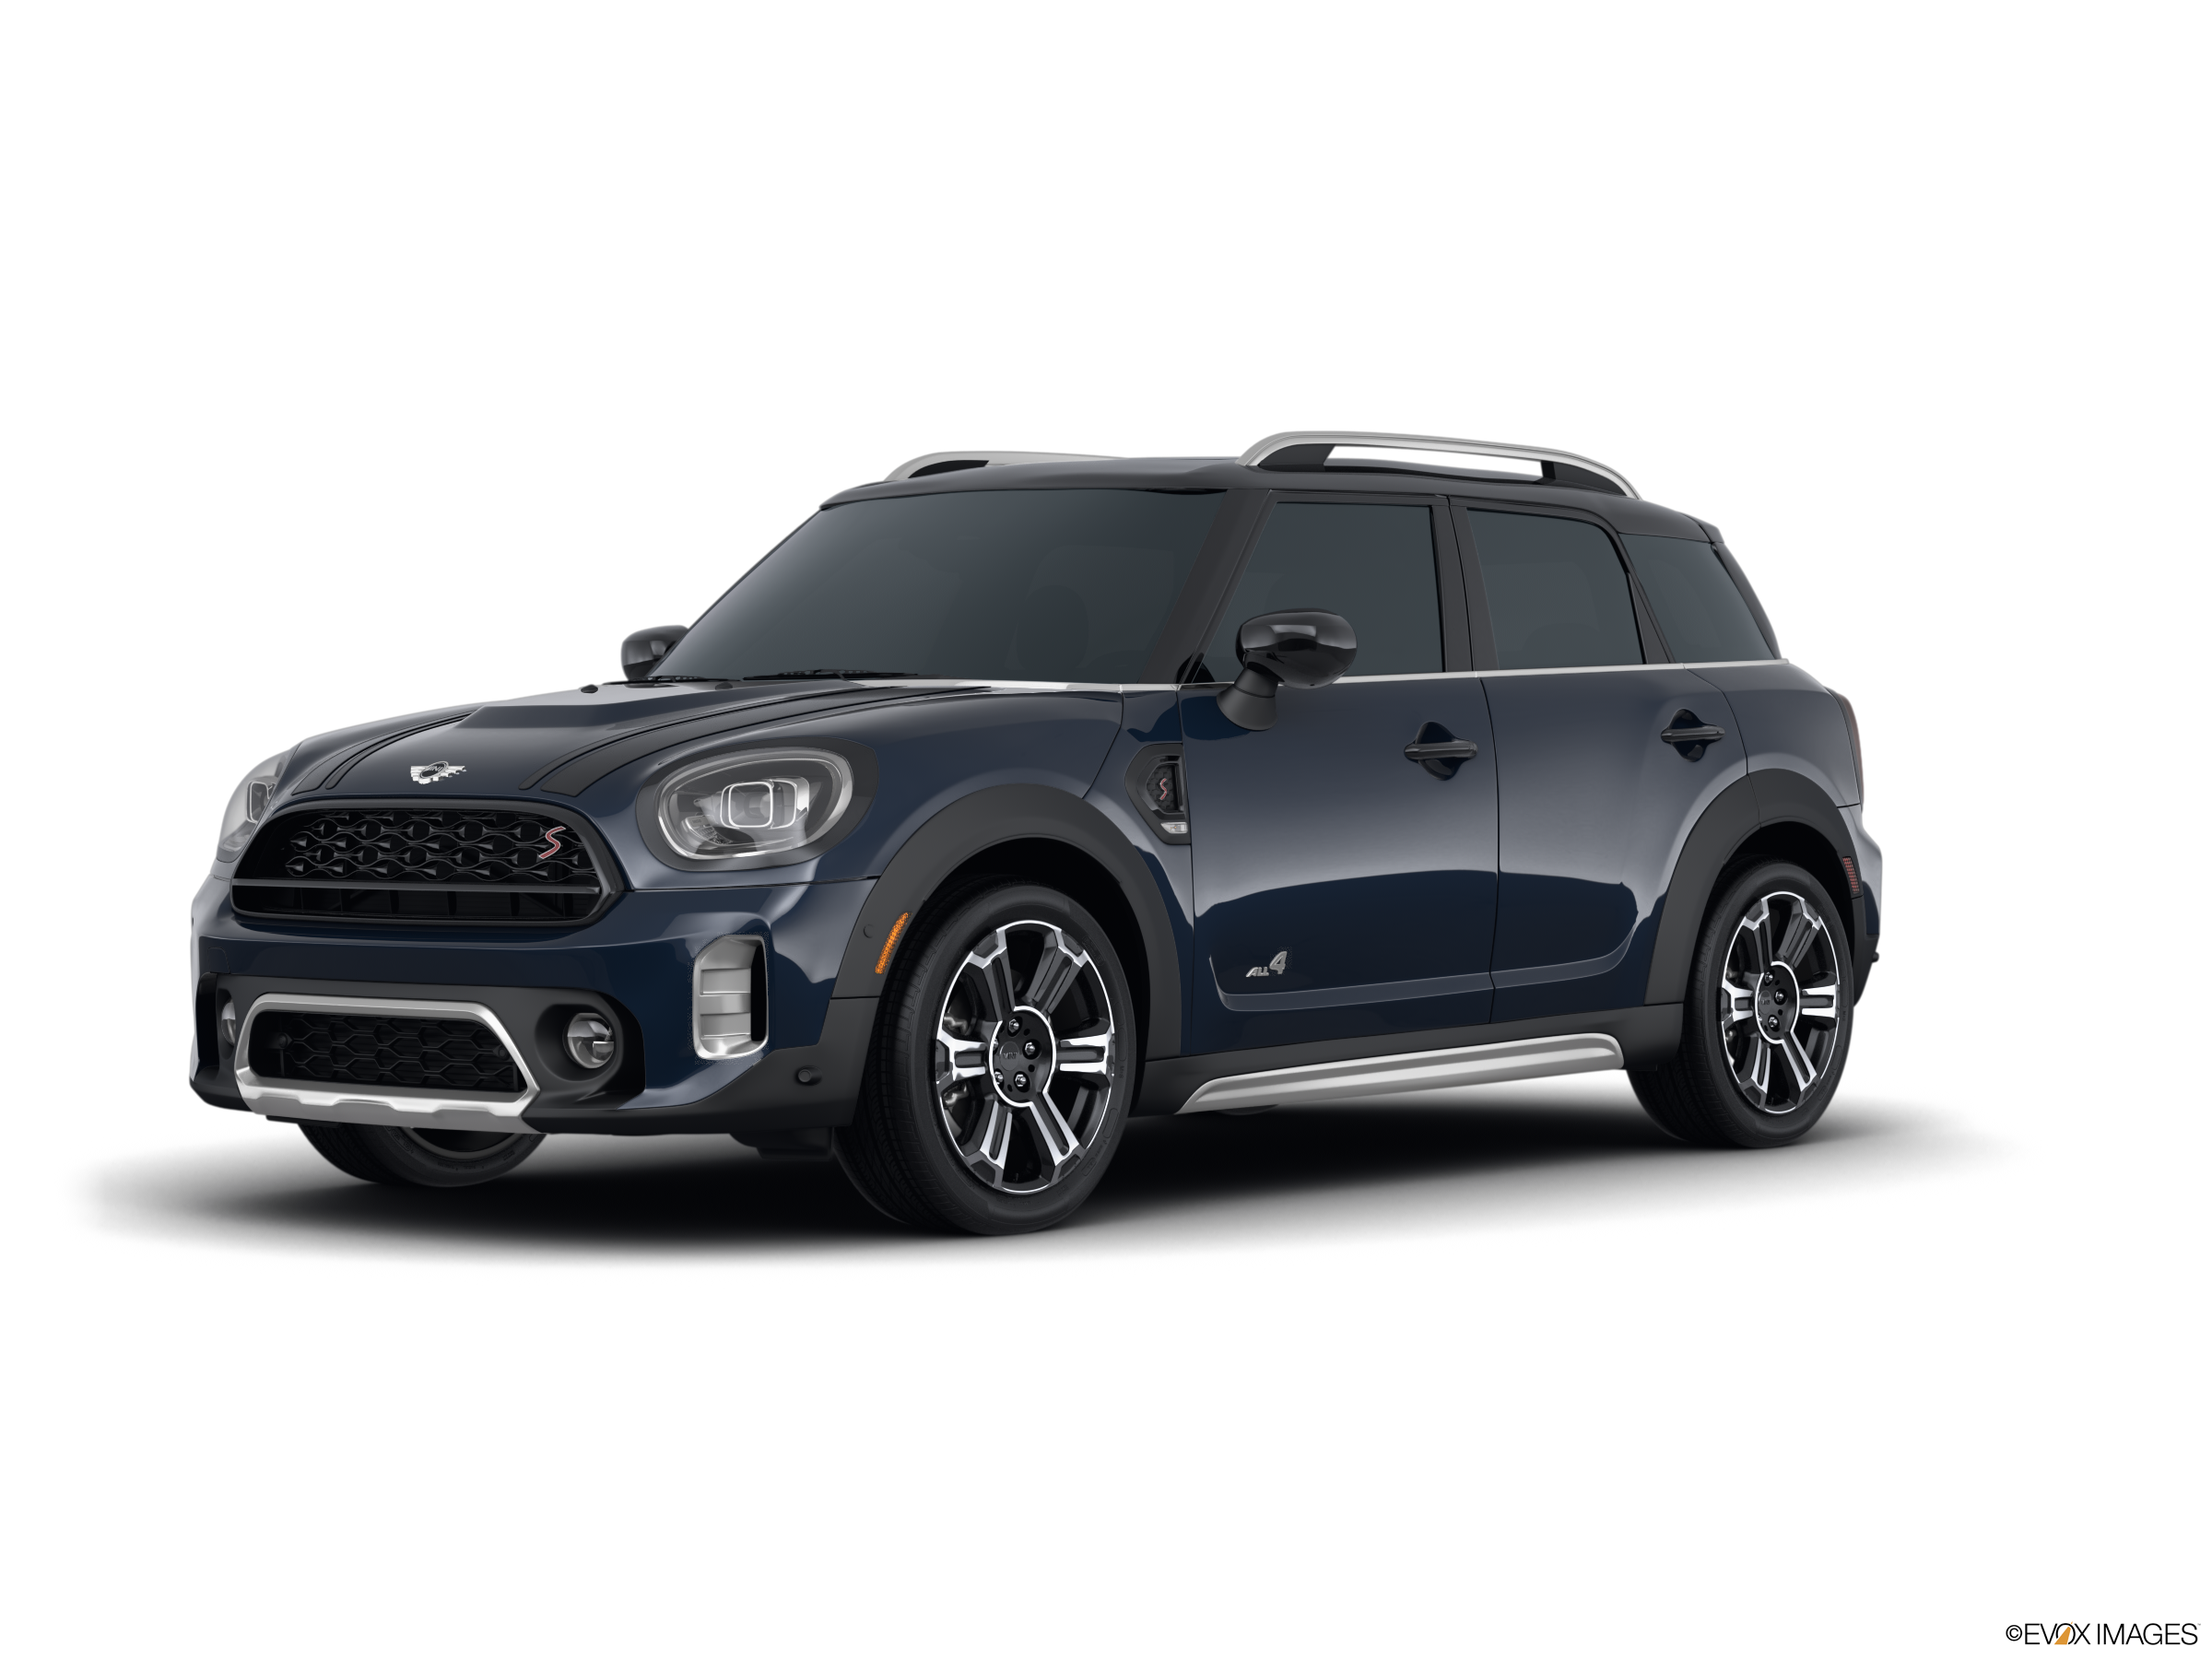 This is the 'new' Mini Countryman